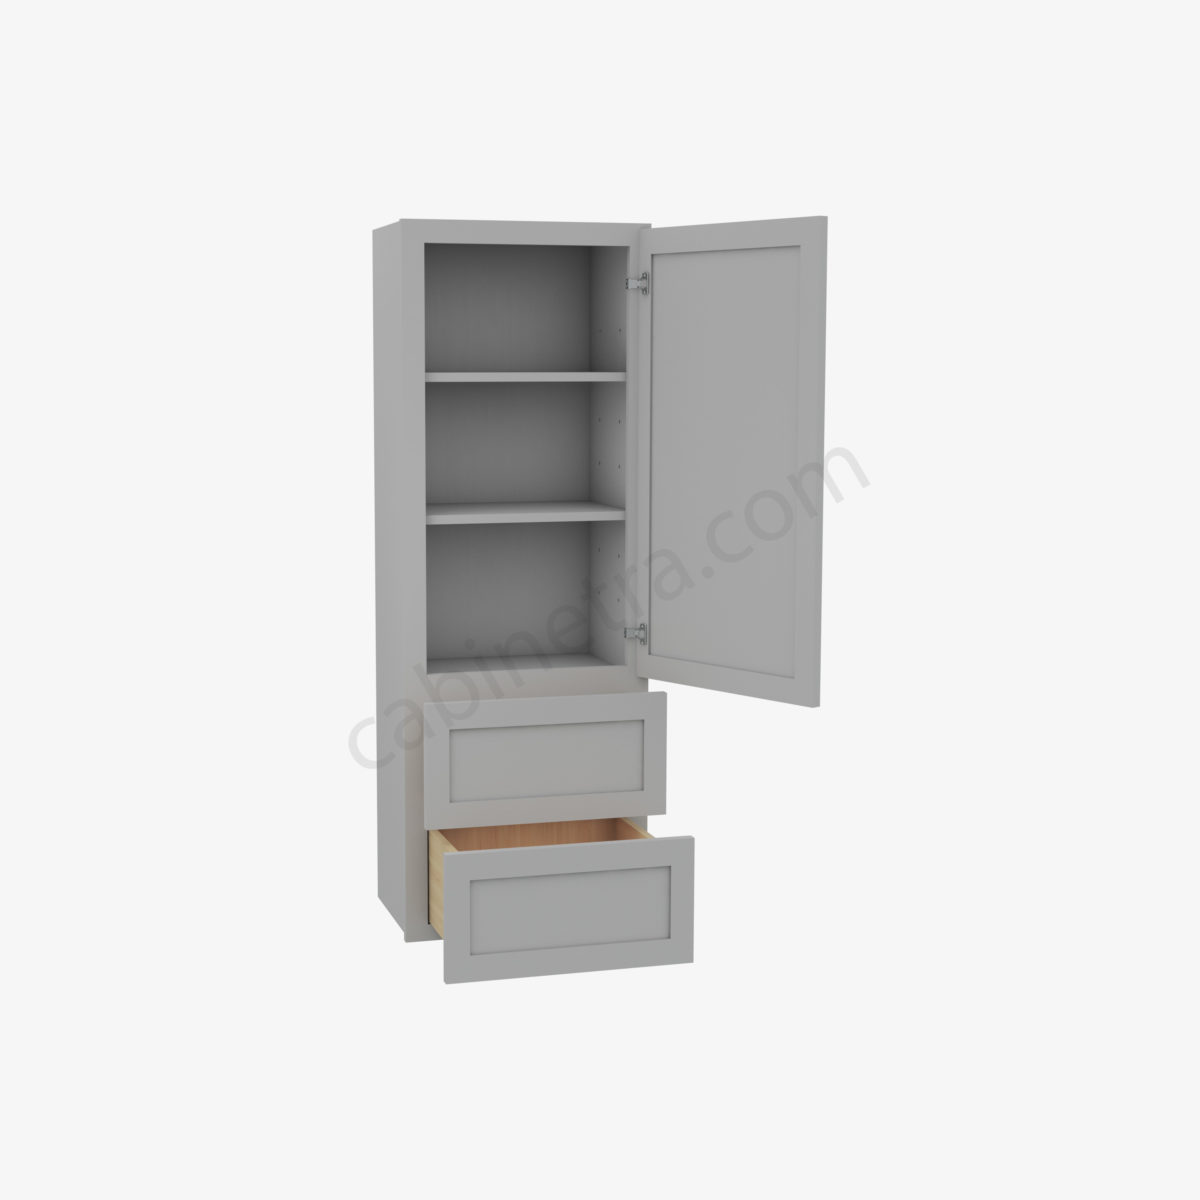 AB W2D1854 1 Forevermark Lait Gray Shaker Cabinetra scaled